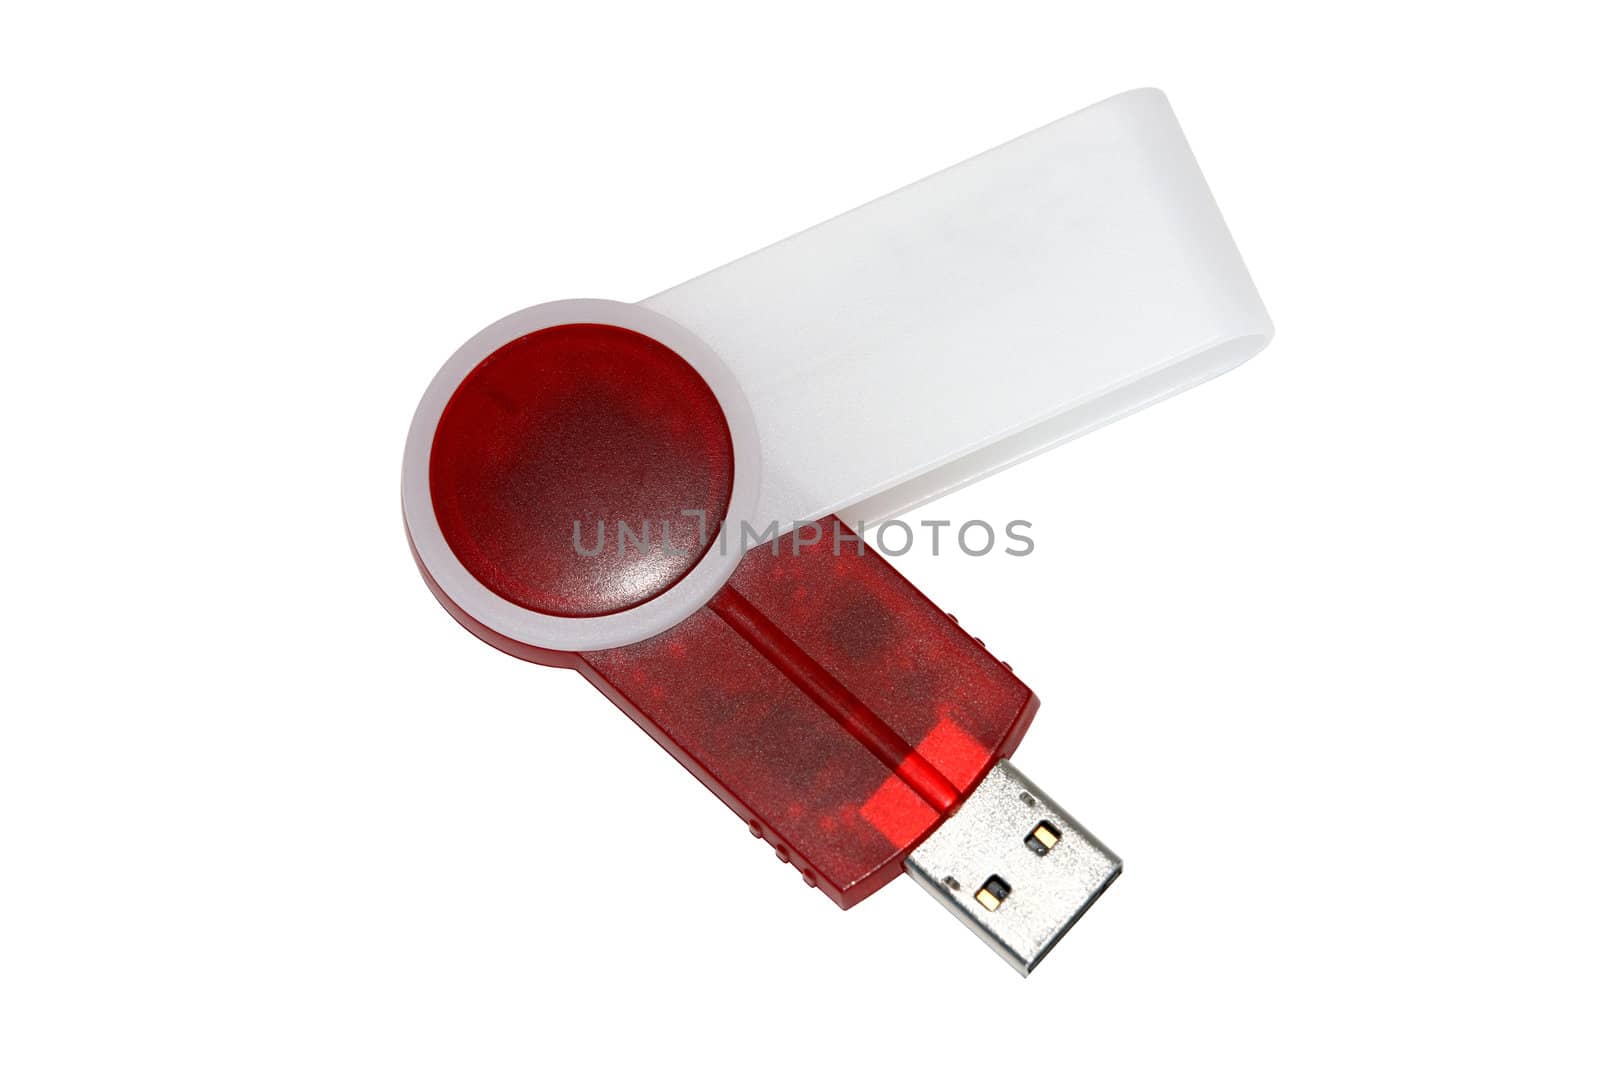 Memory Stick by monner